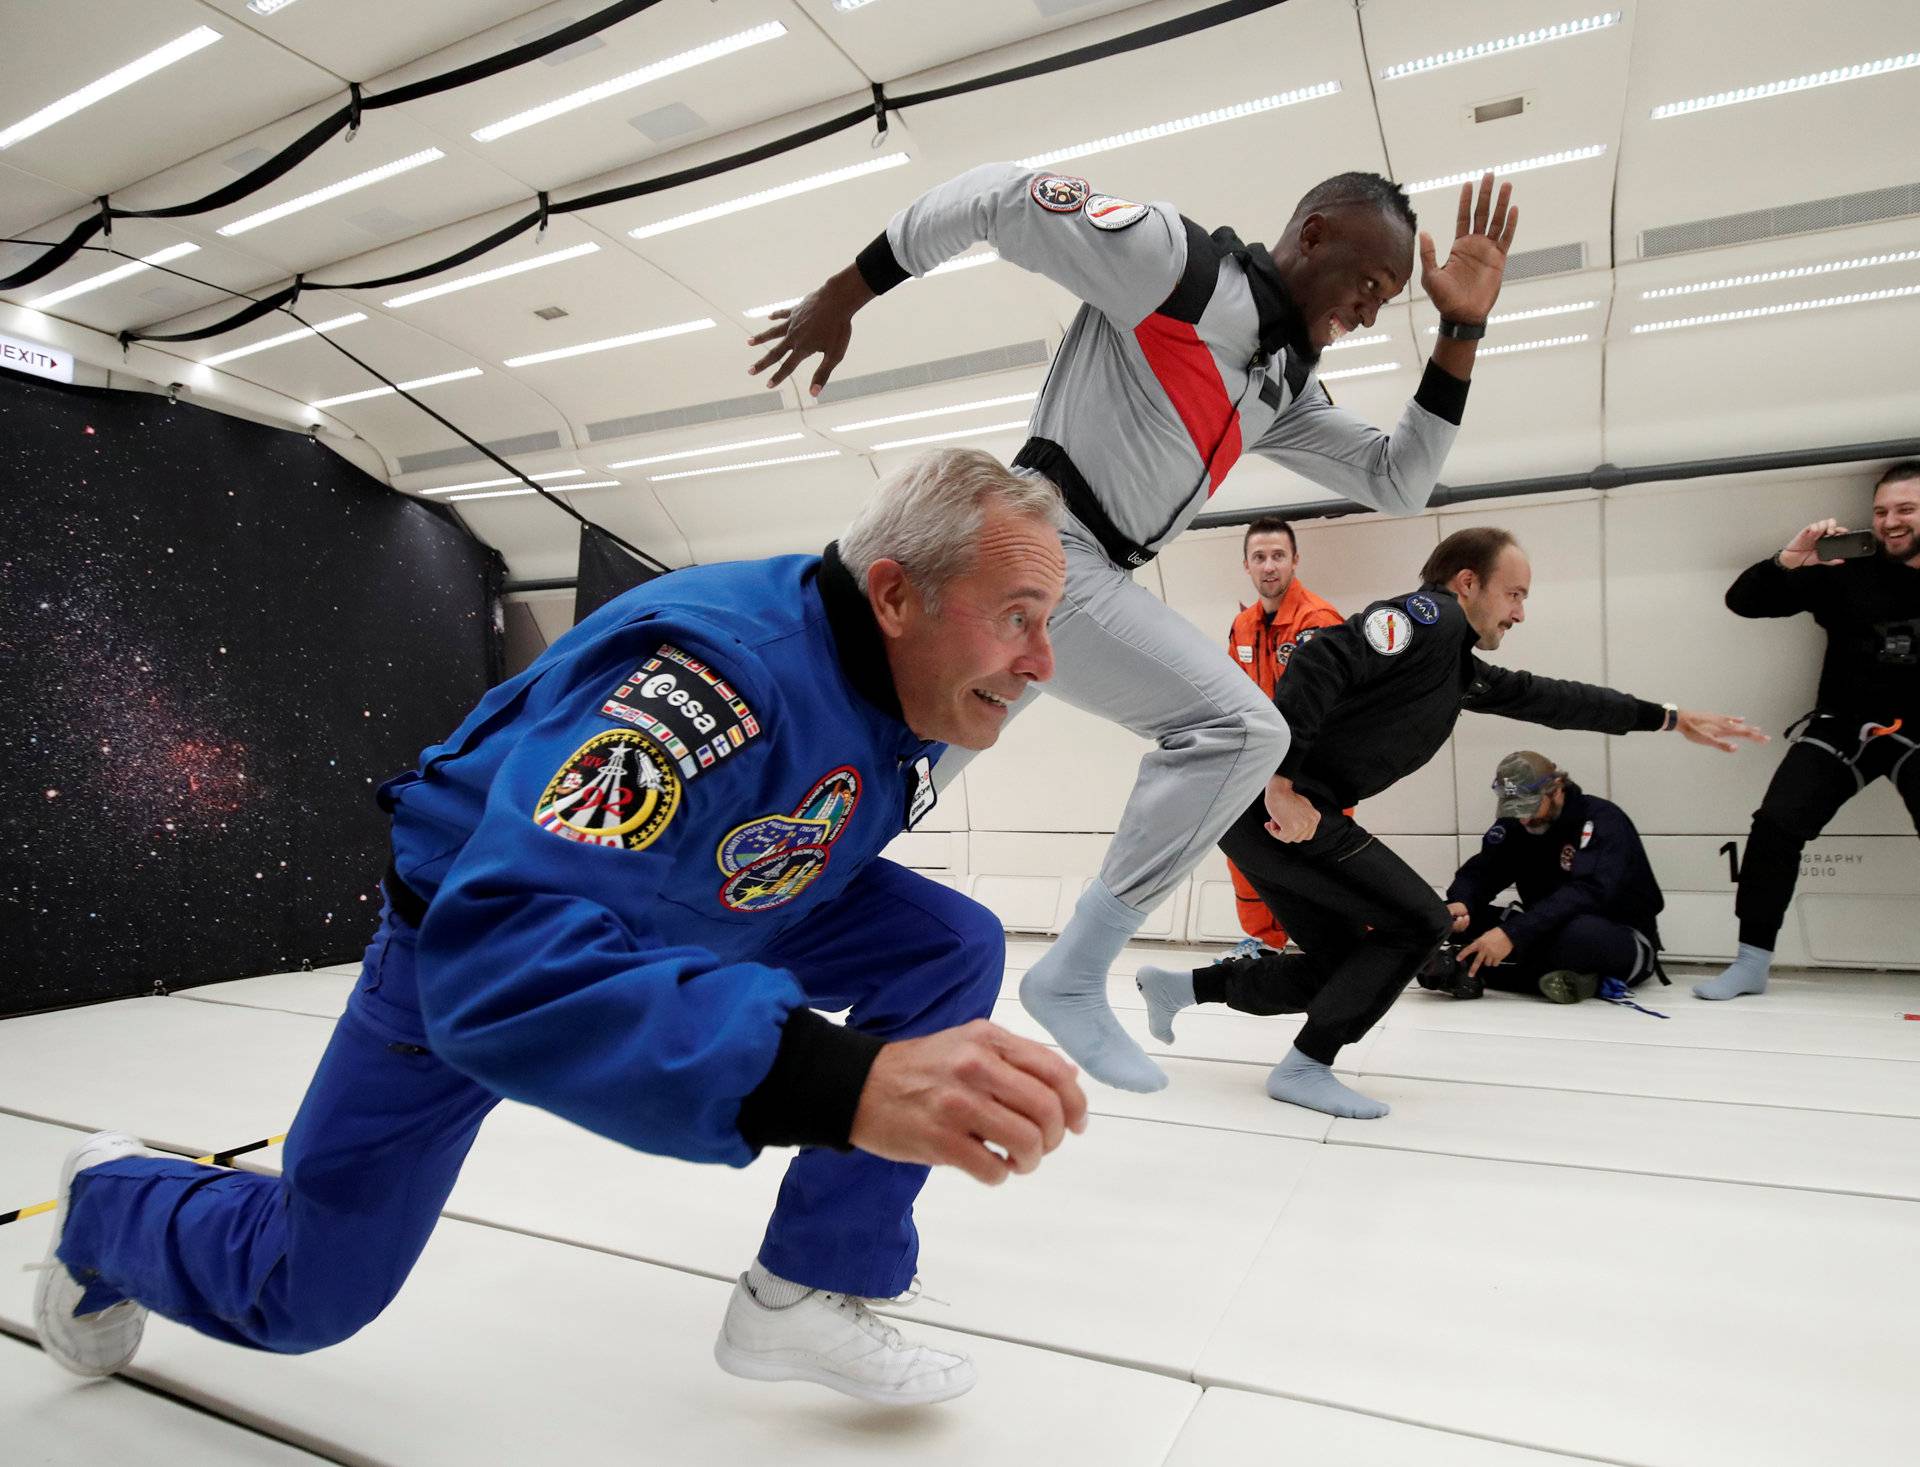 Retired sprinter Usain Bolt, French astronaut Jean-Francois Clervoy and French Interior designer Octave de Gaulle enjoy zero gravity conditions during a flight in a specially modified plane above Reims